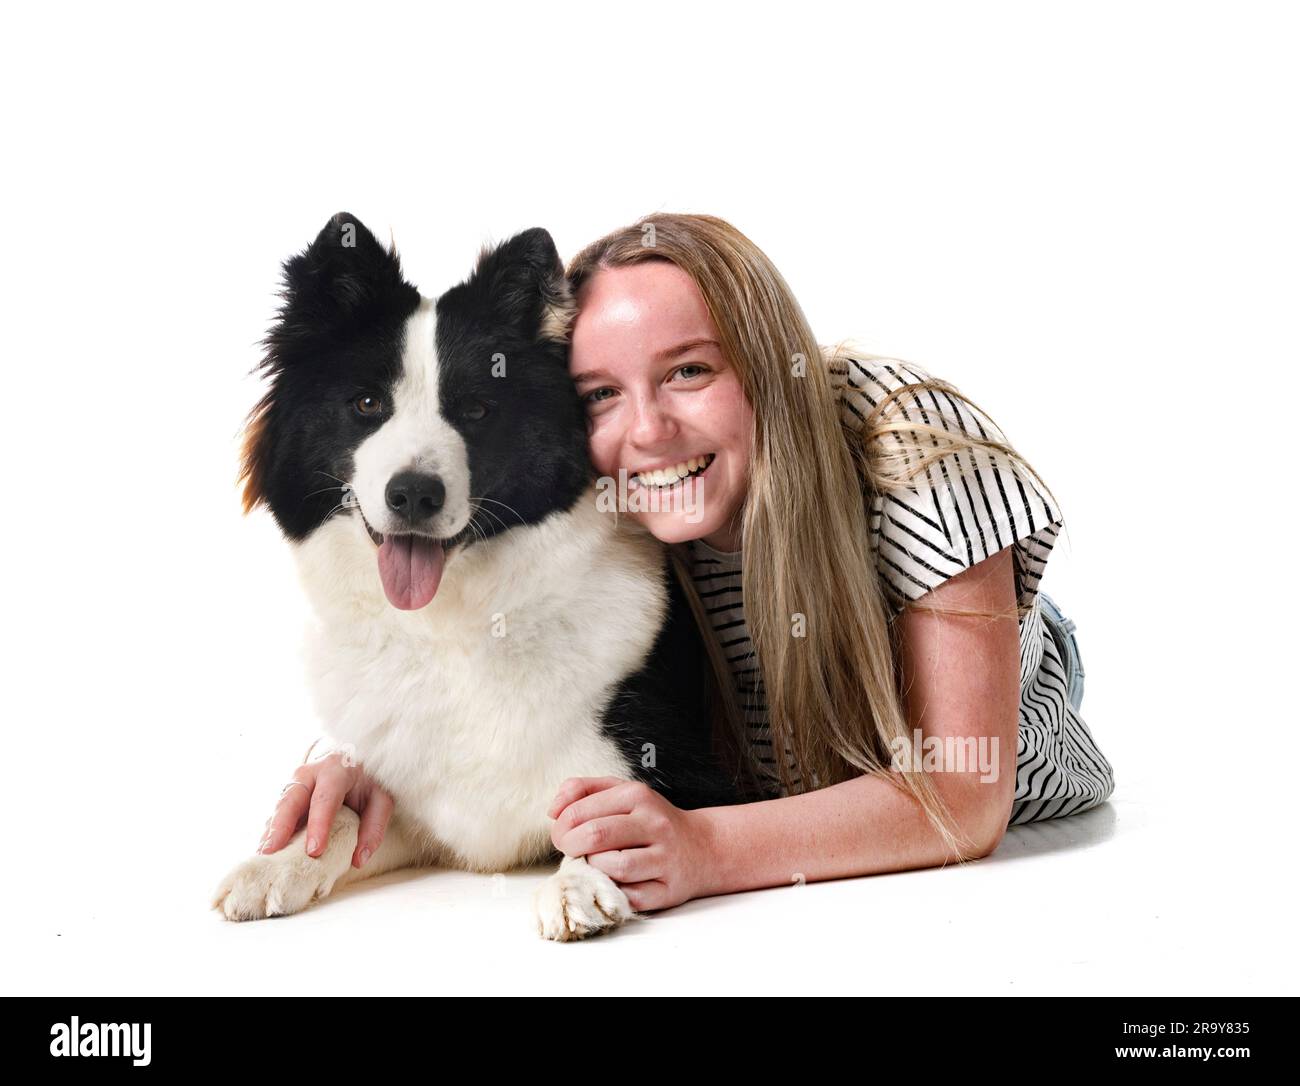 Finnish Lapphund and woman in front of white background Stock Photo